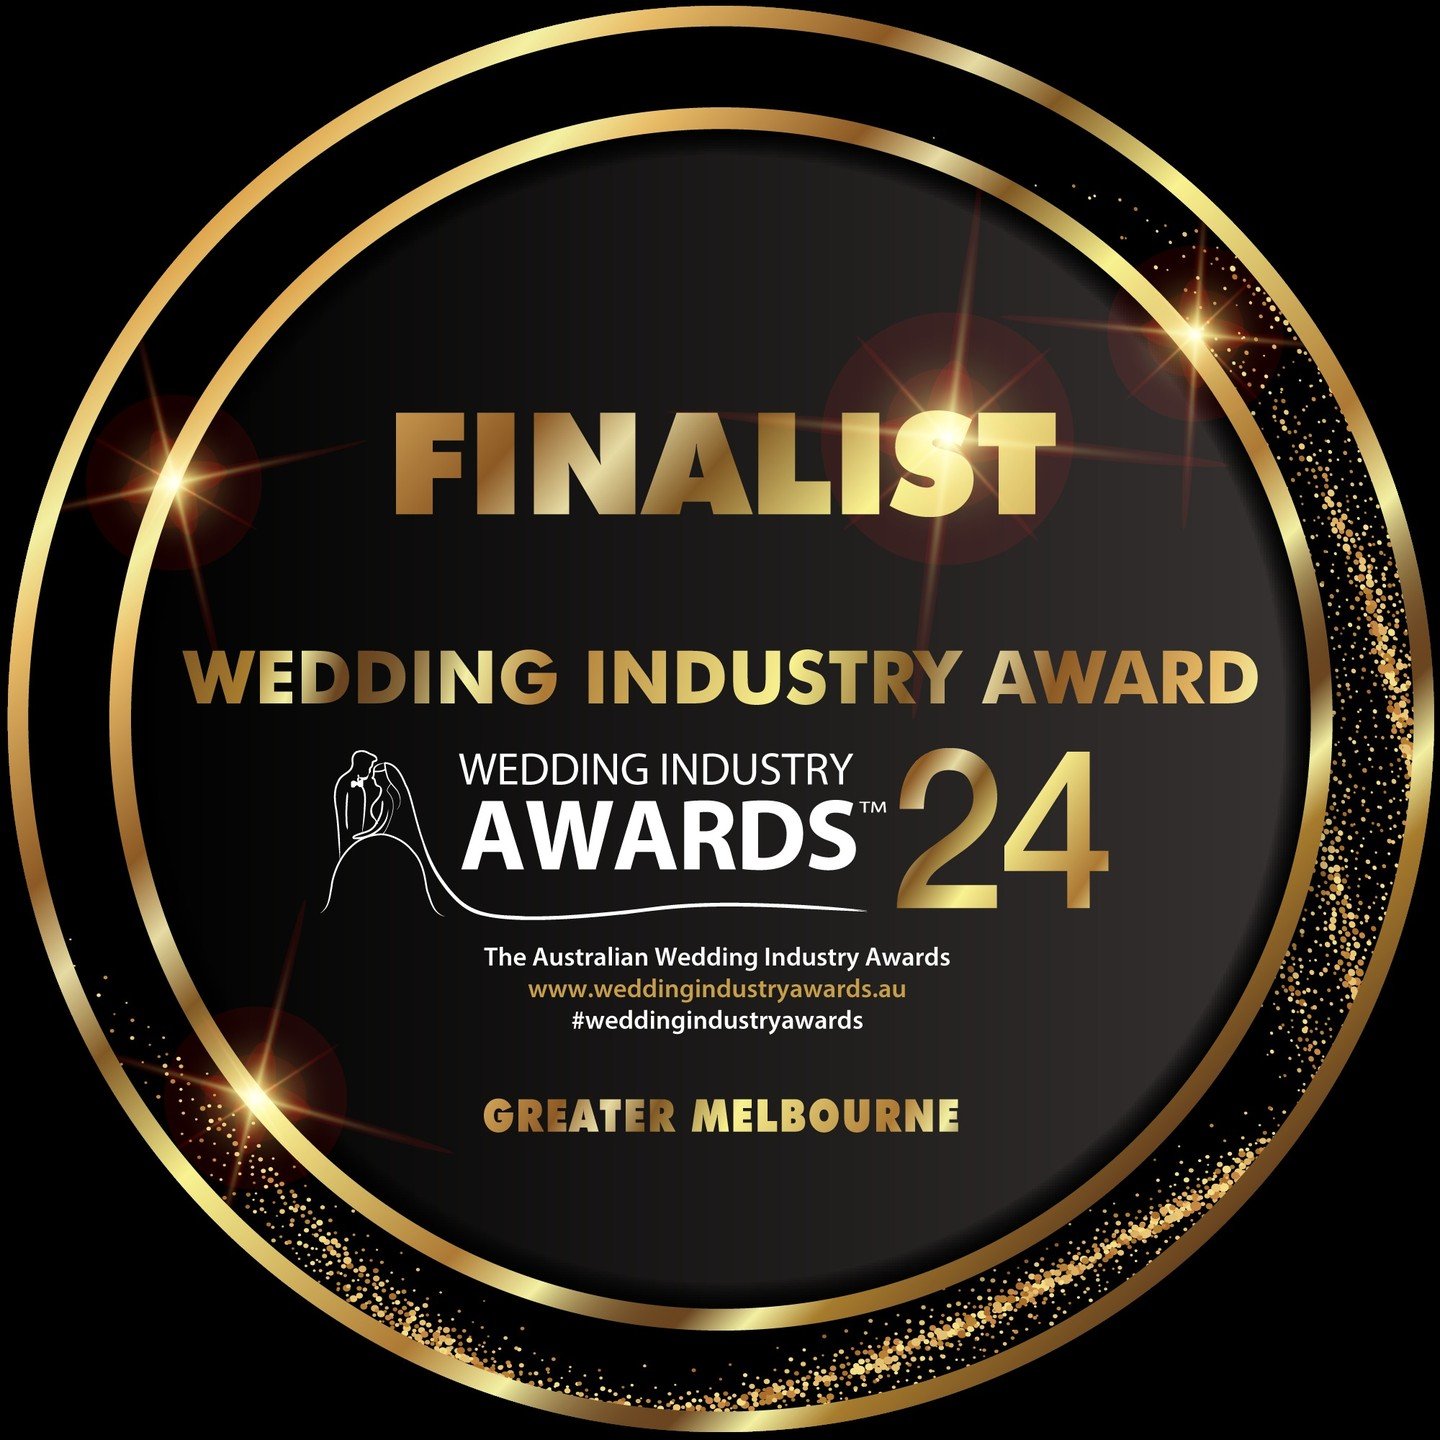 2024 GREATER MELBOURNE &ndash; Wedding Industry Awards

CONGRATULATIONS:
SHERINE BURL MARRIAGE CELEBRANT in the Category of Civil Marriage Celebrant - is a 2024 FINALIST!

Wedding Industry Awards for Greater Melbourne to be decided on 21 May 2024.

V